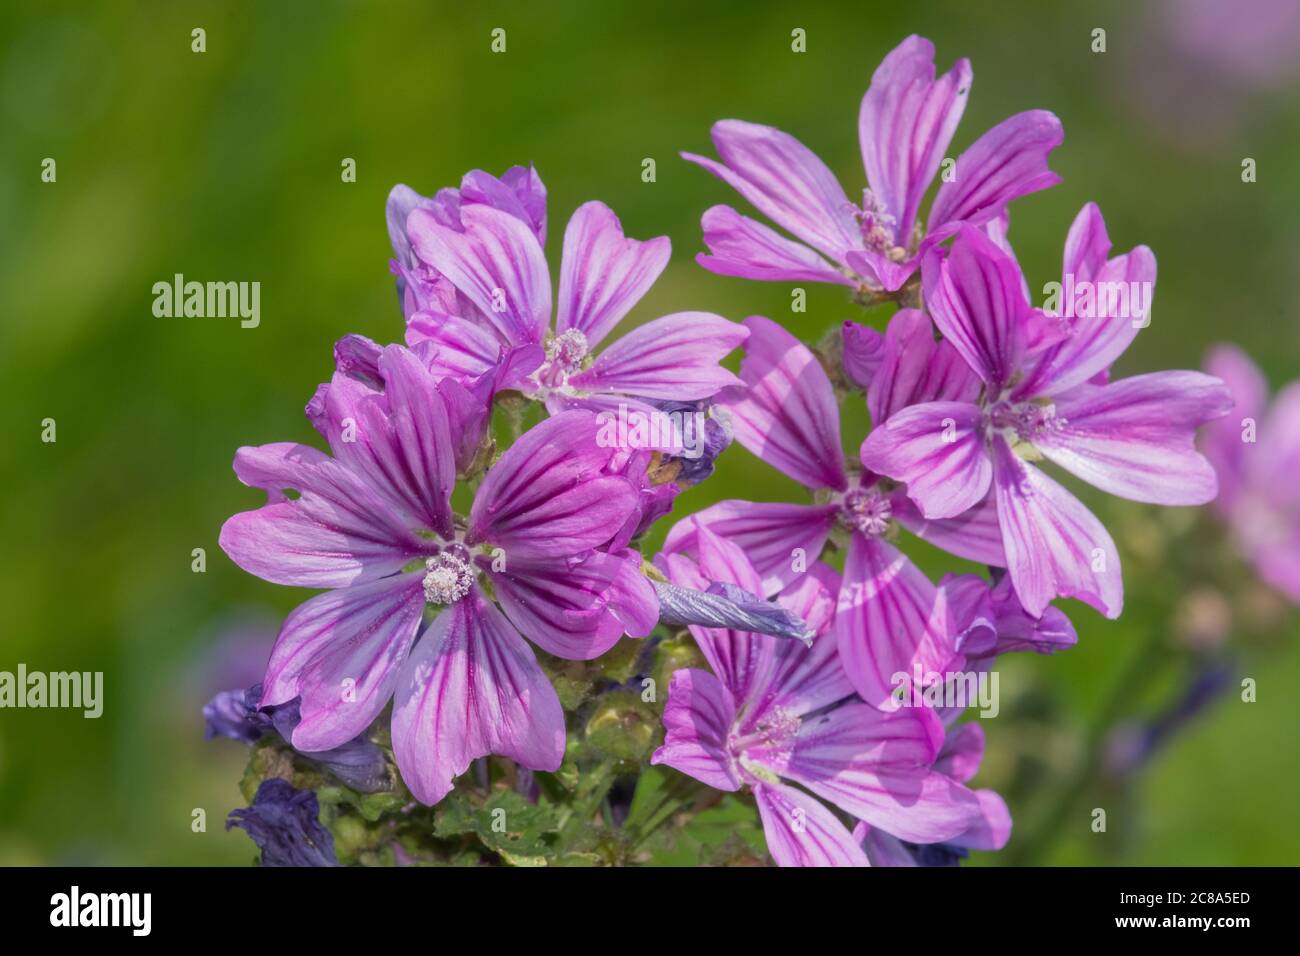 Close up of common mallow (malva sylvestris) flowers in bloom Stock Photo